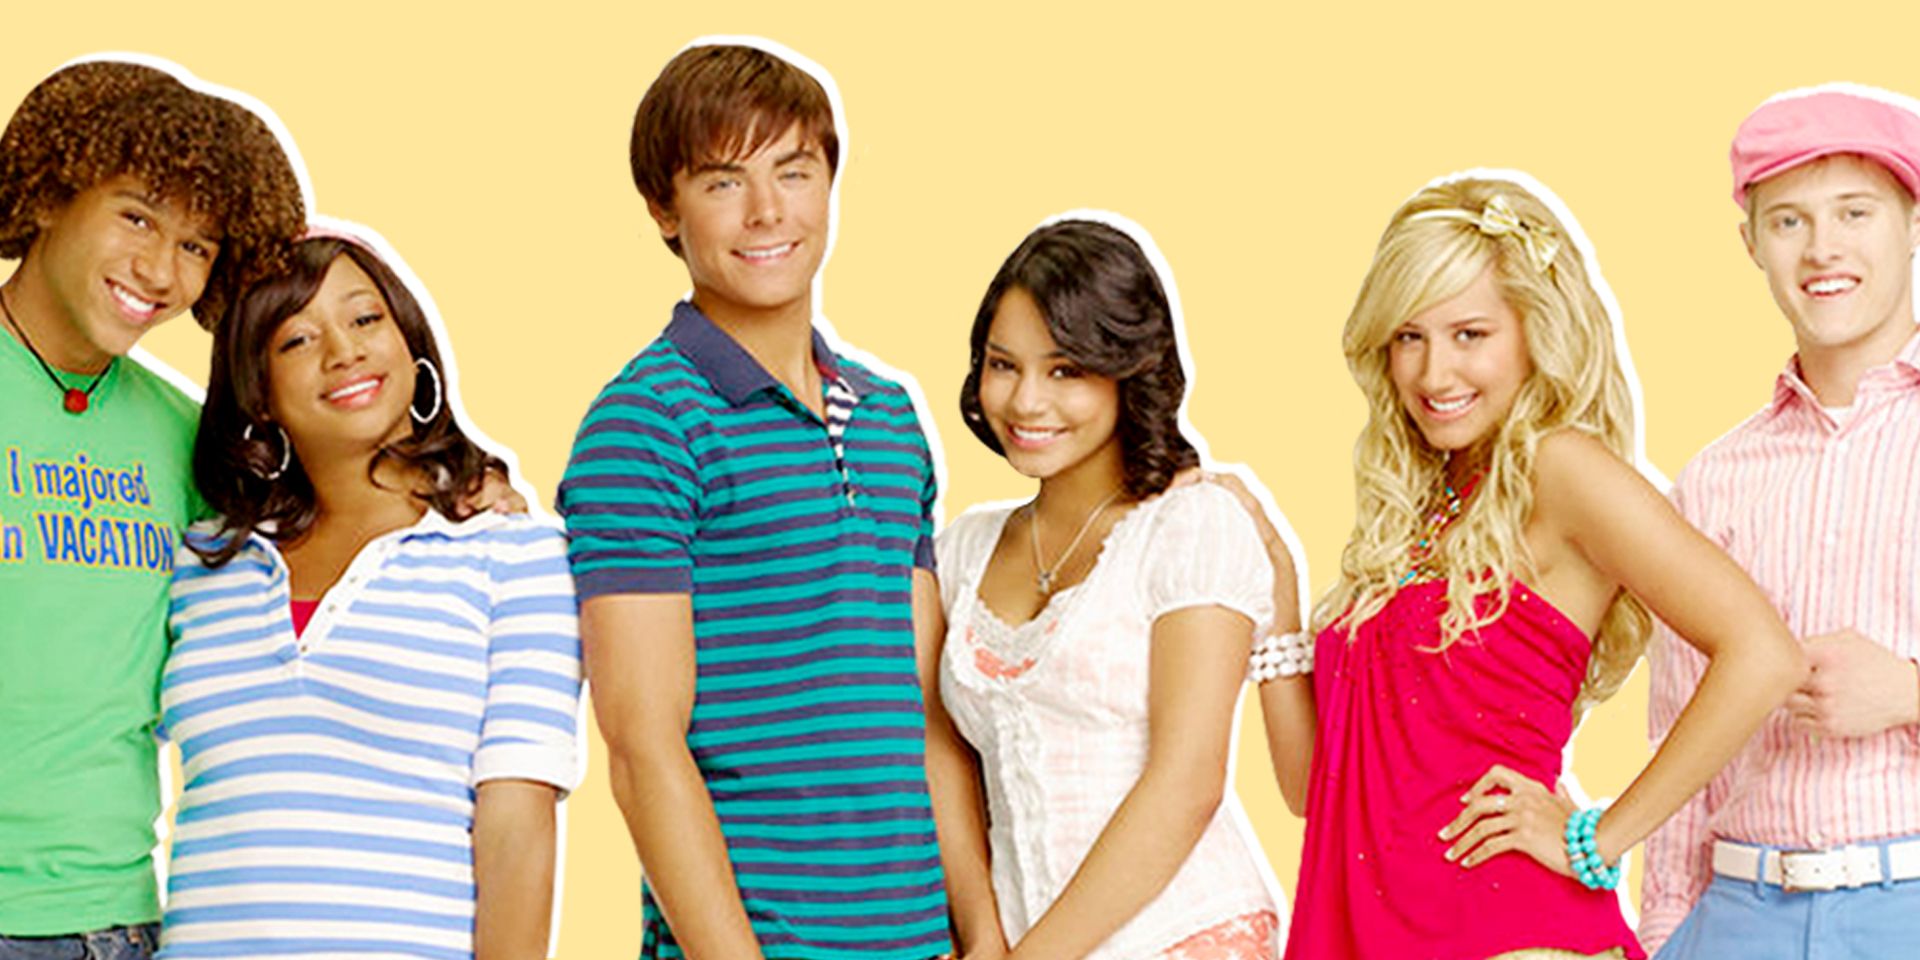 The 'High School Musical' Cast—Including Zac Efron—Are Reuniting, and  People Are Very Excited